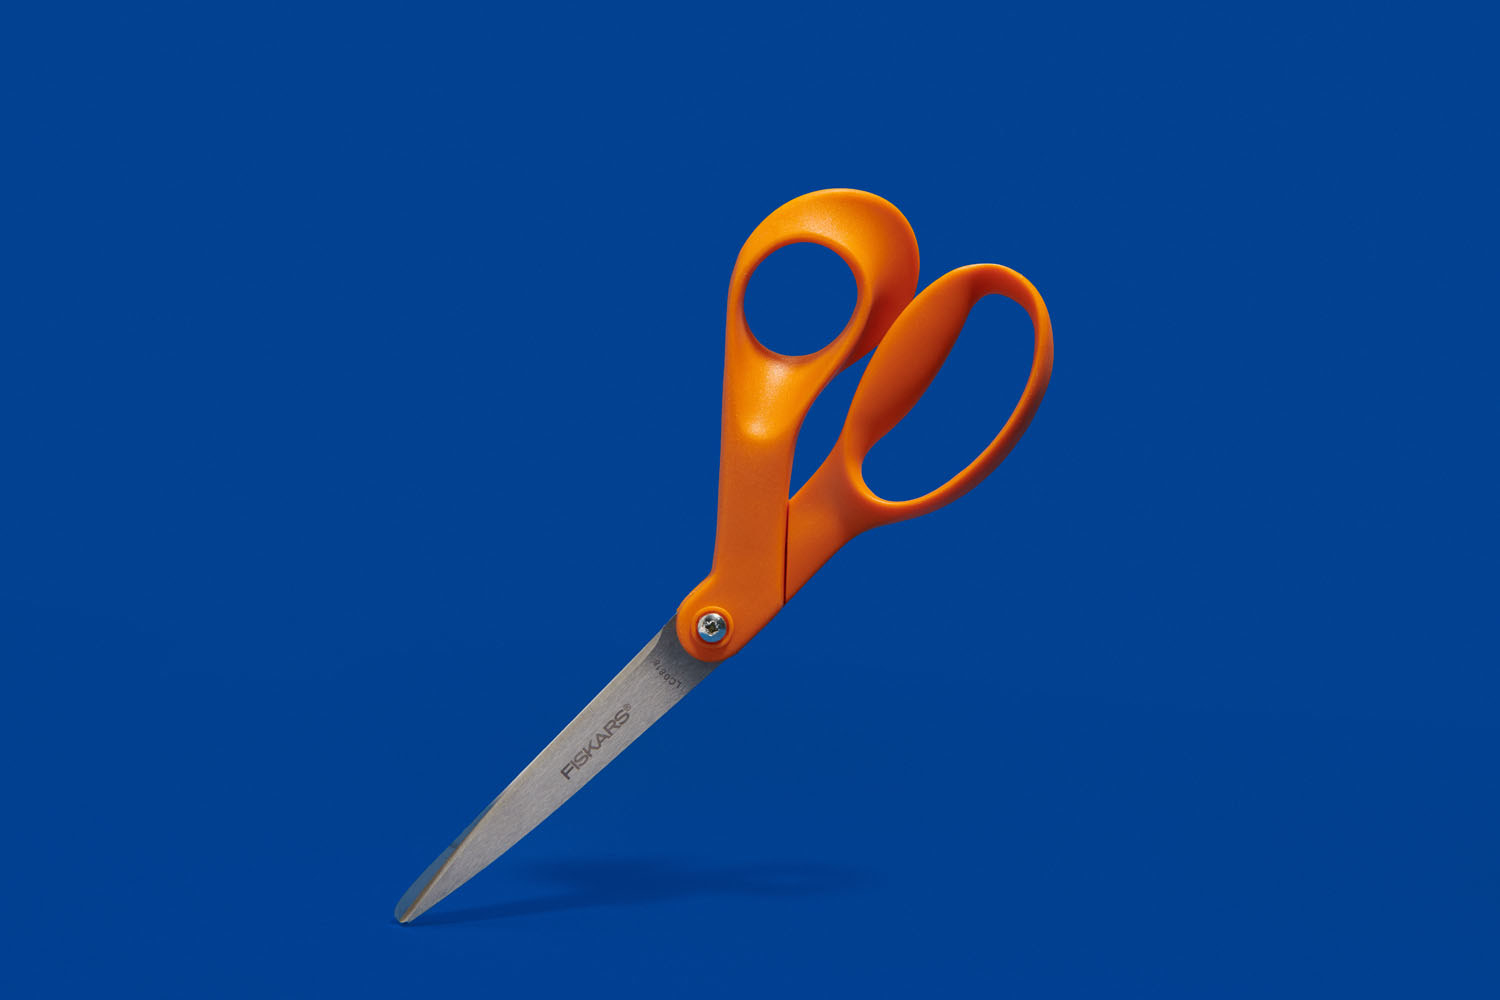 How to Choose the Best Scissors for Your Home, Office, or Classroom